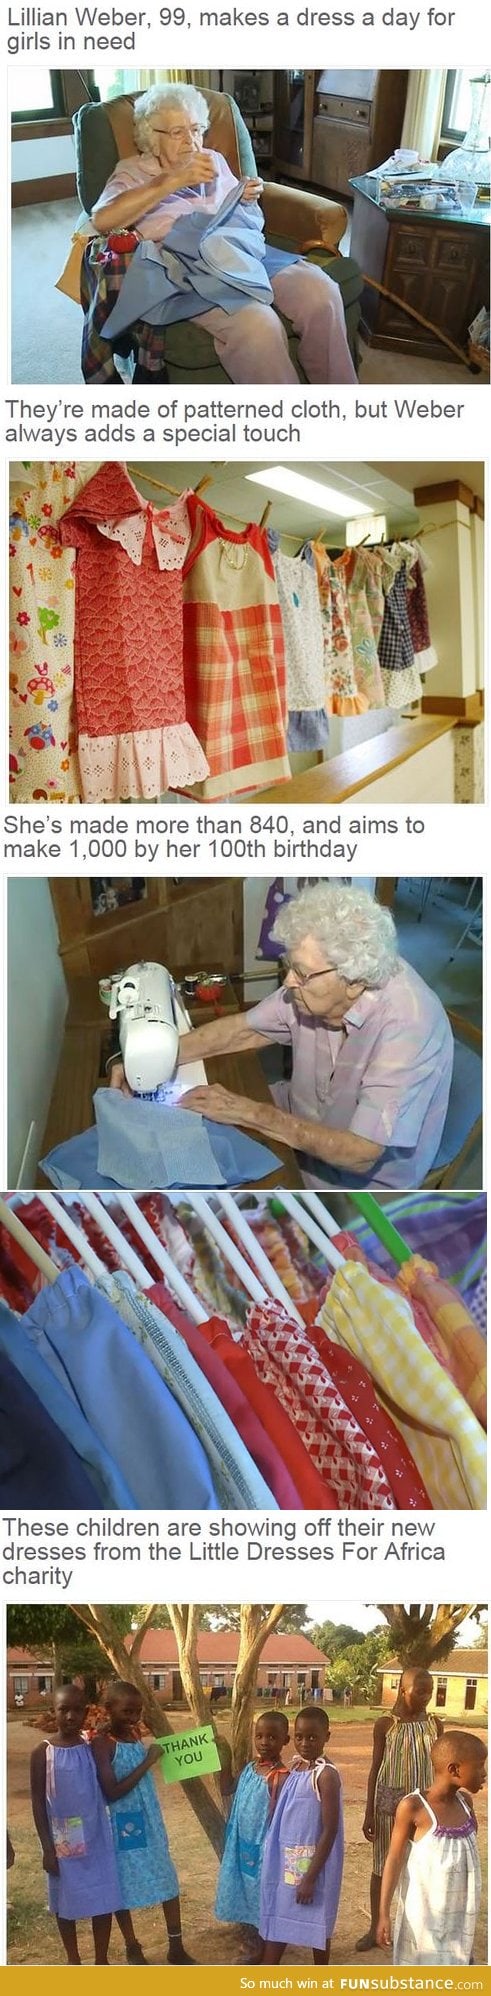 Faith in humanity: Restored